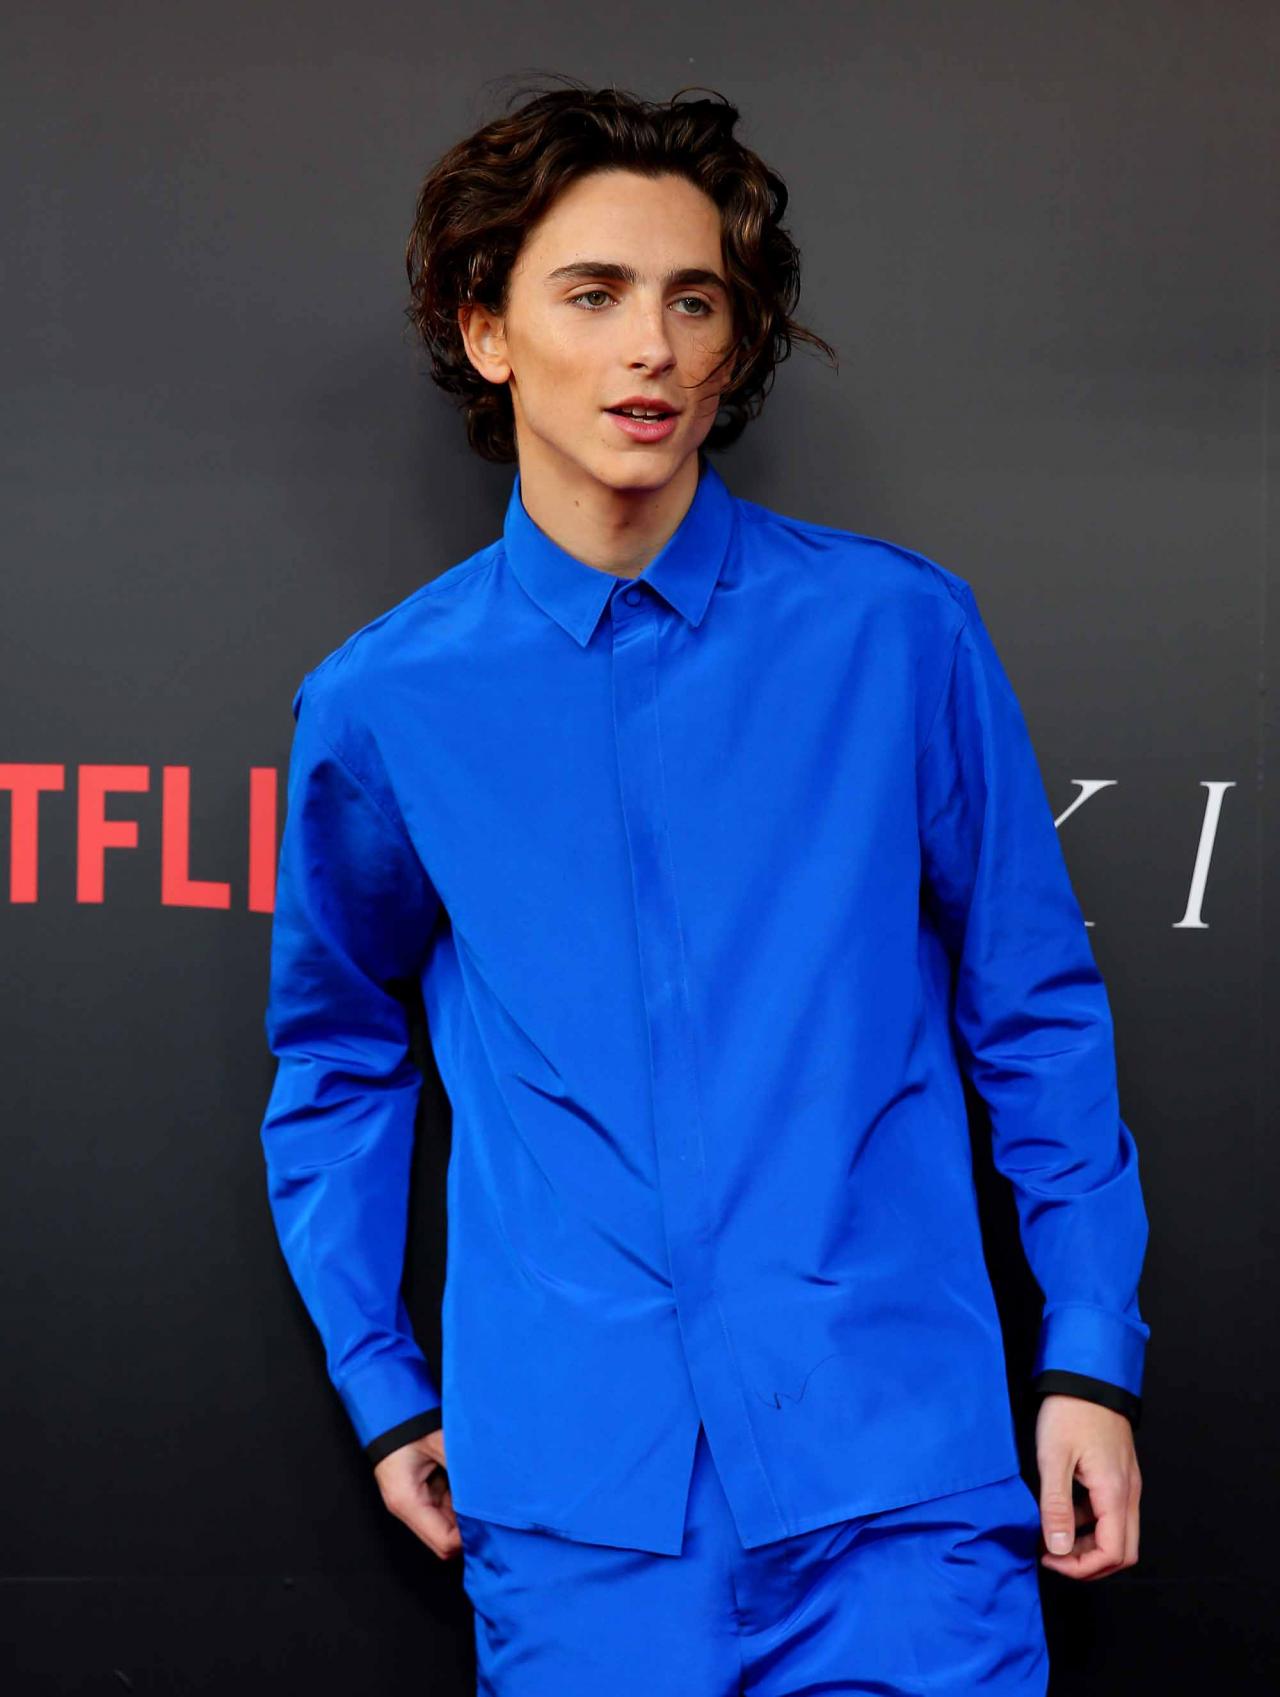 SYDNEY, AUSTRALIA - OCTOBER 10: Timothee Chalamet attends the Australian premiere of THE KING at Ritz Cinema on October 10, 2019 in Sydney, Australia. (Photo by Don Arnold/WireImage)